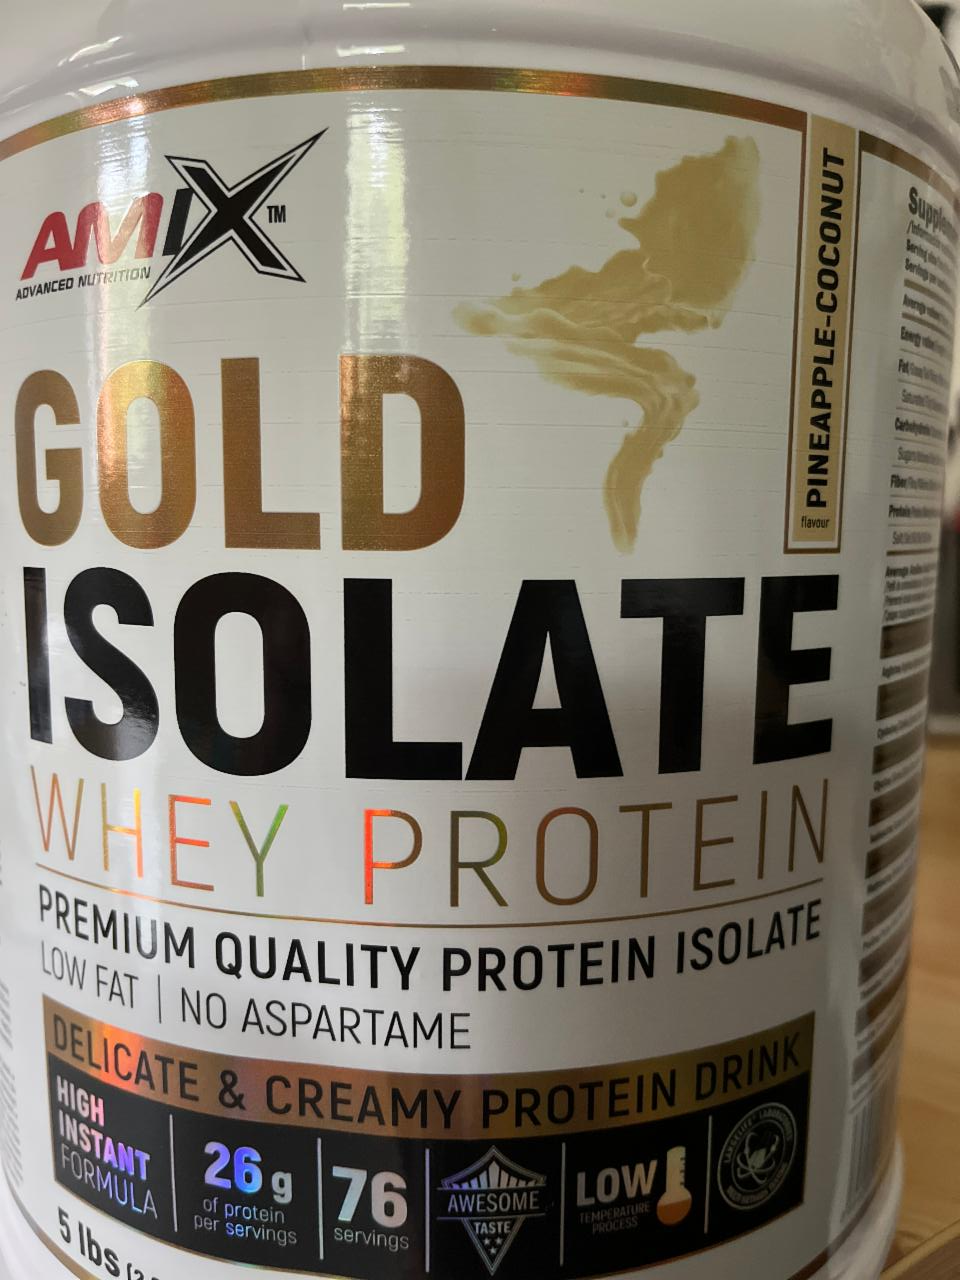 Fotografie - Gold Isolate Whey Protein Pineapple coconut juice Amix